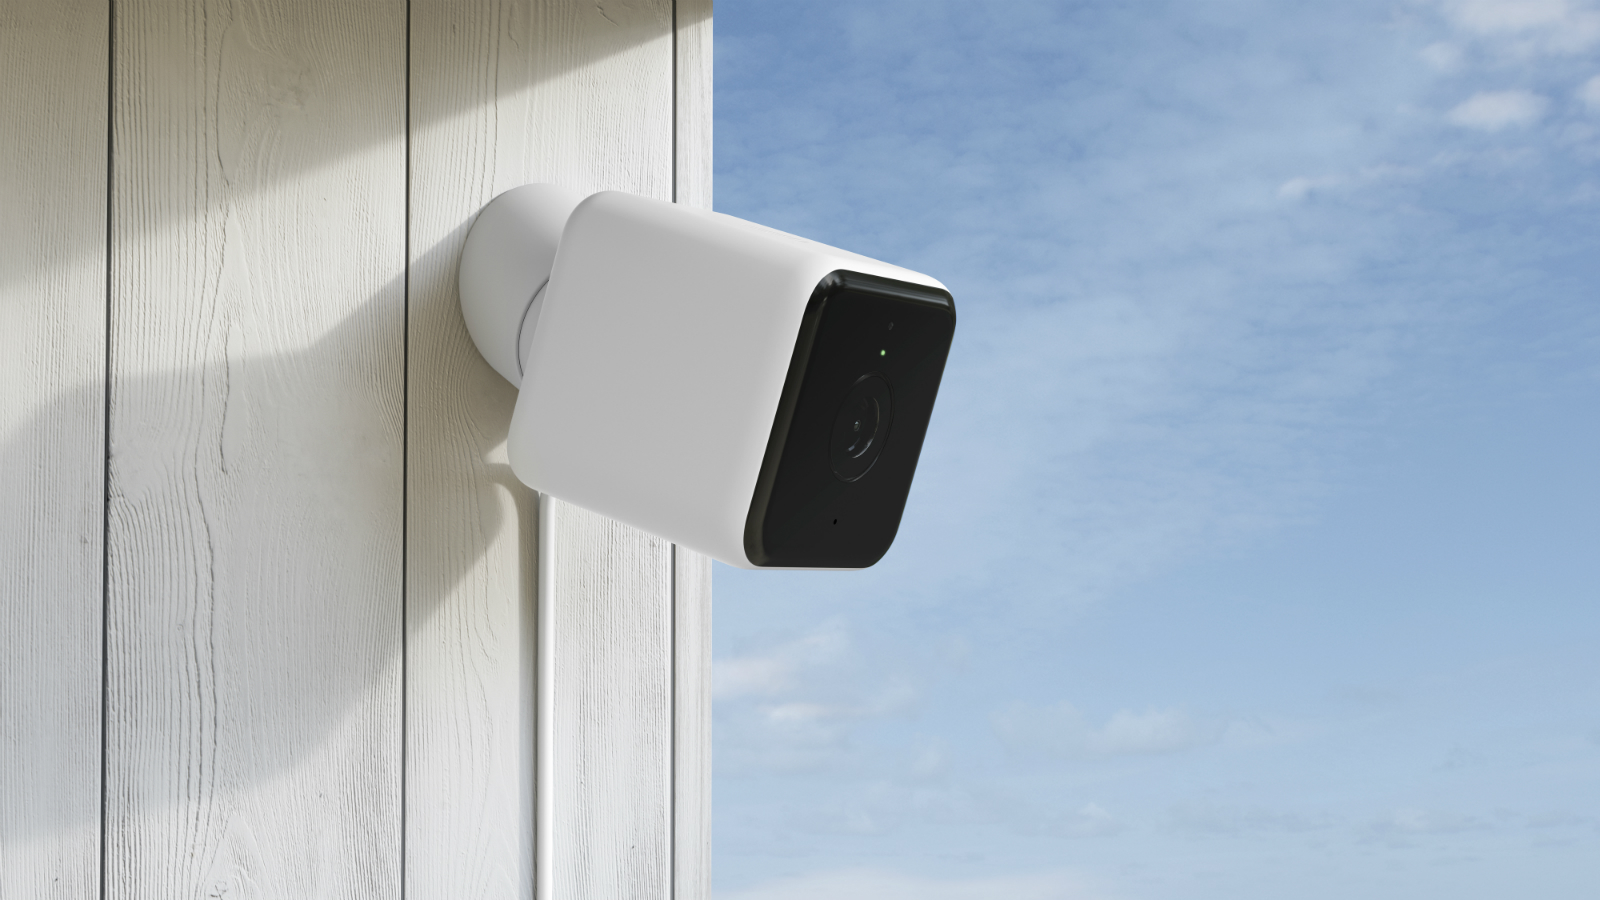 hive view outdoor smart security camera render  right angle insitu on white wood panelling copy